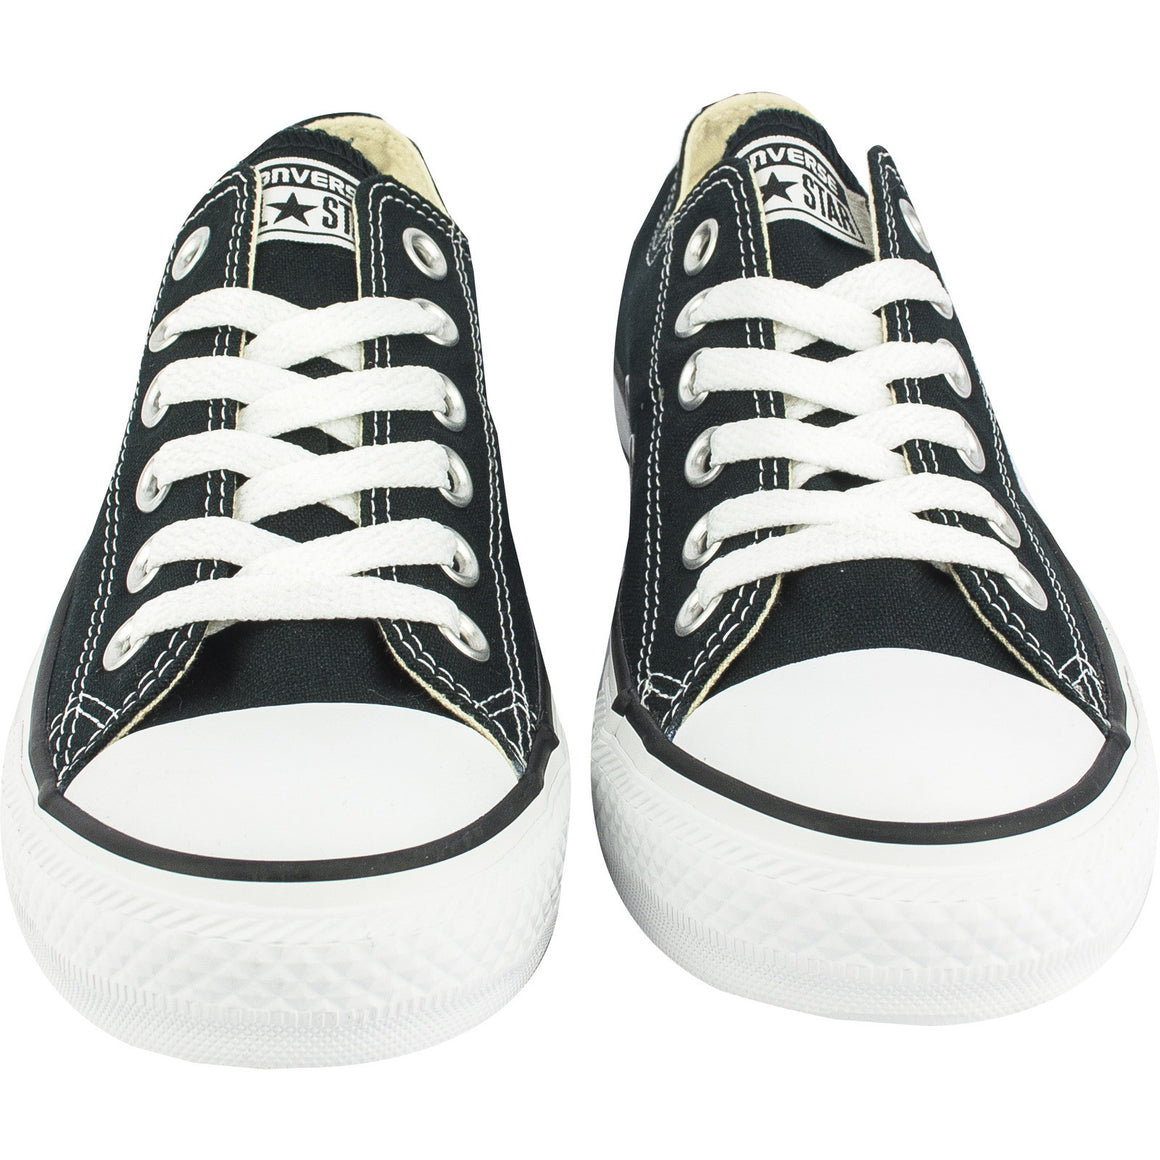 converse all star low tops mens,OFF 76 